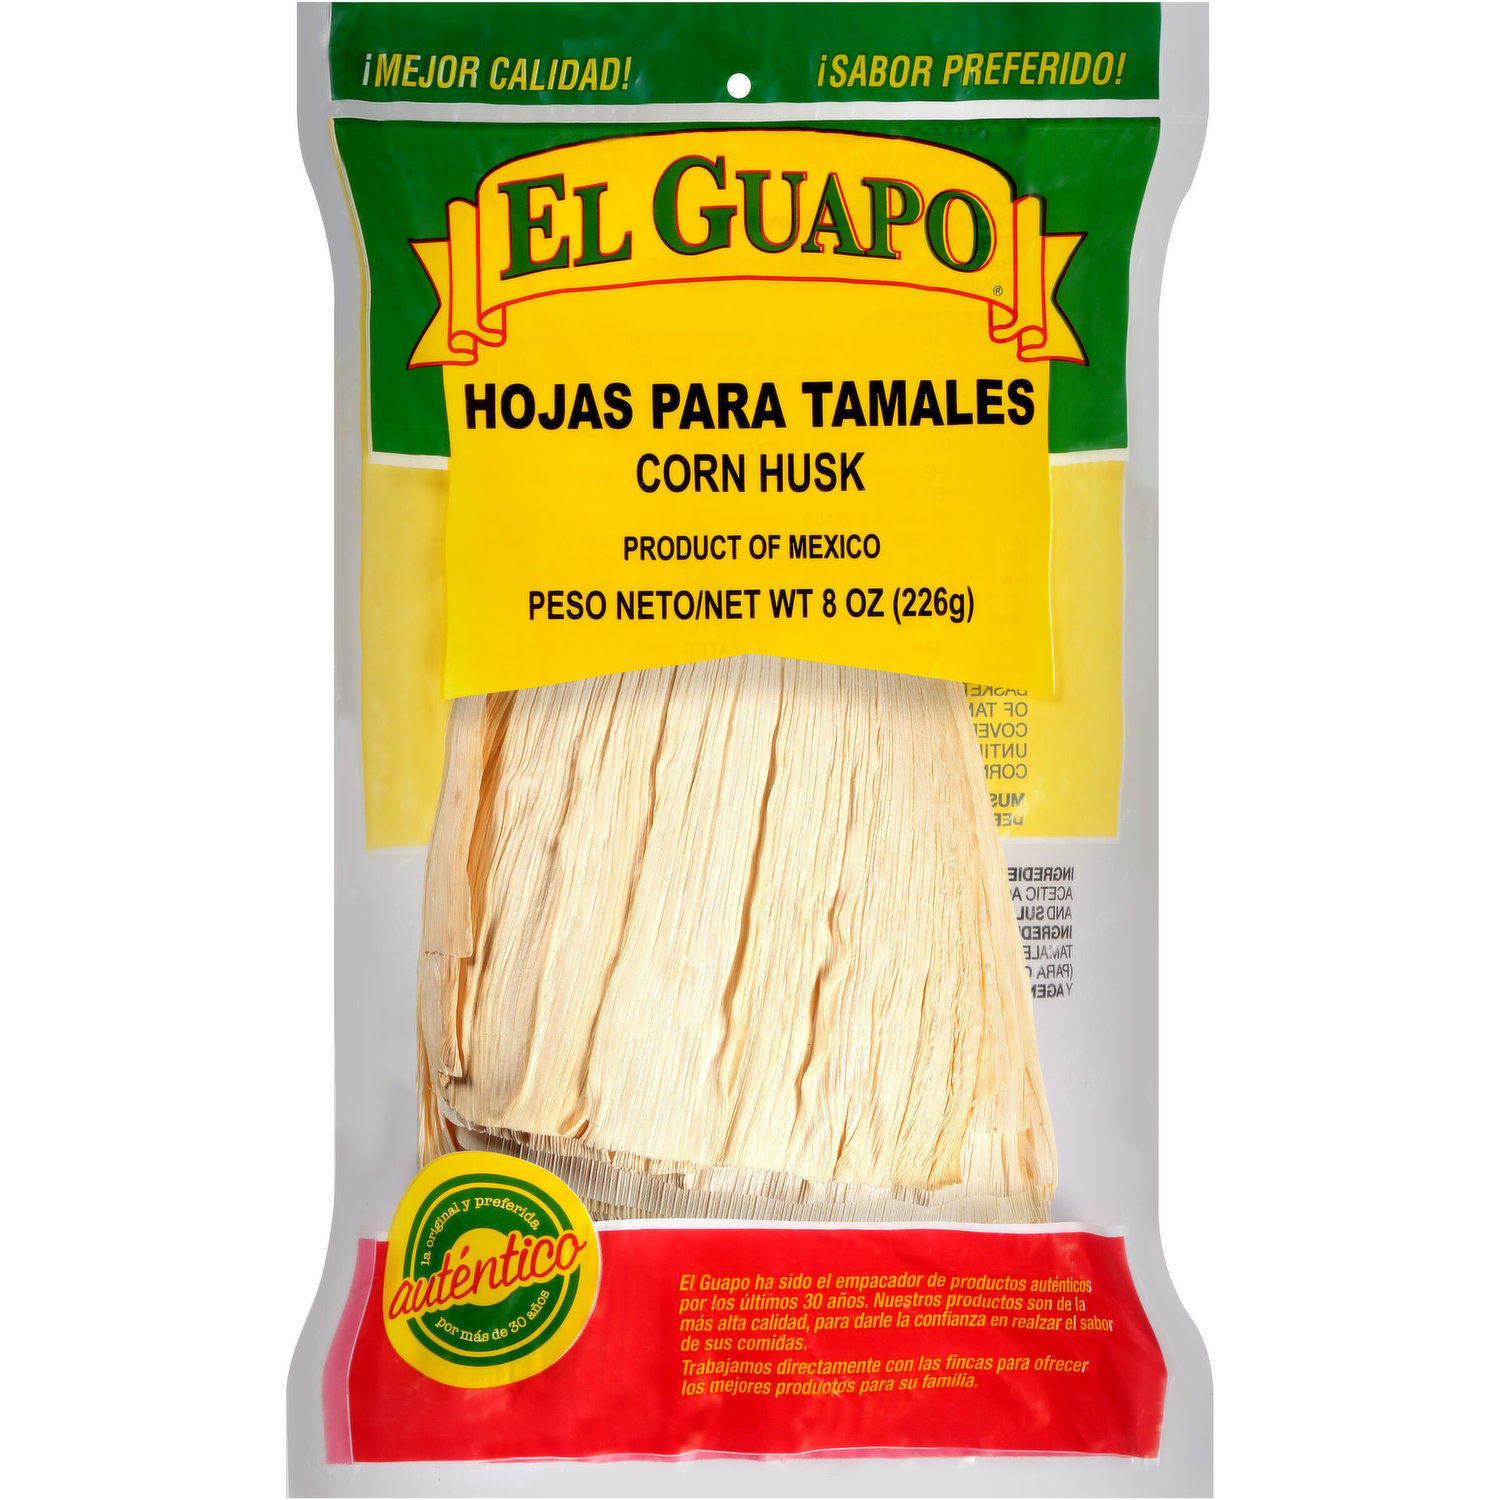 Corn Husks for Mexican Tamales, By Lau Pereira